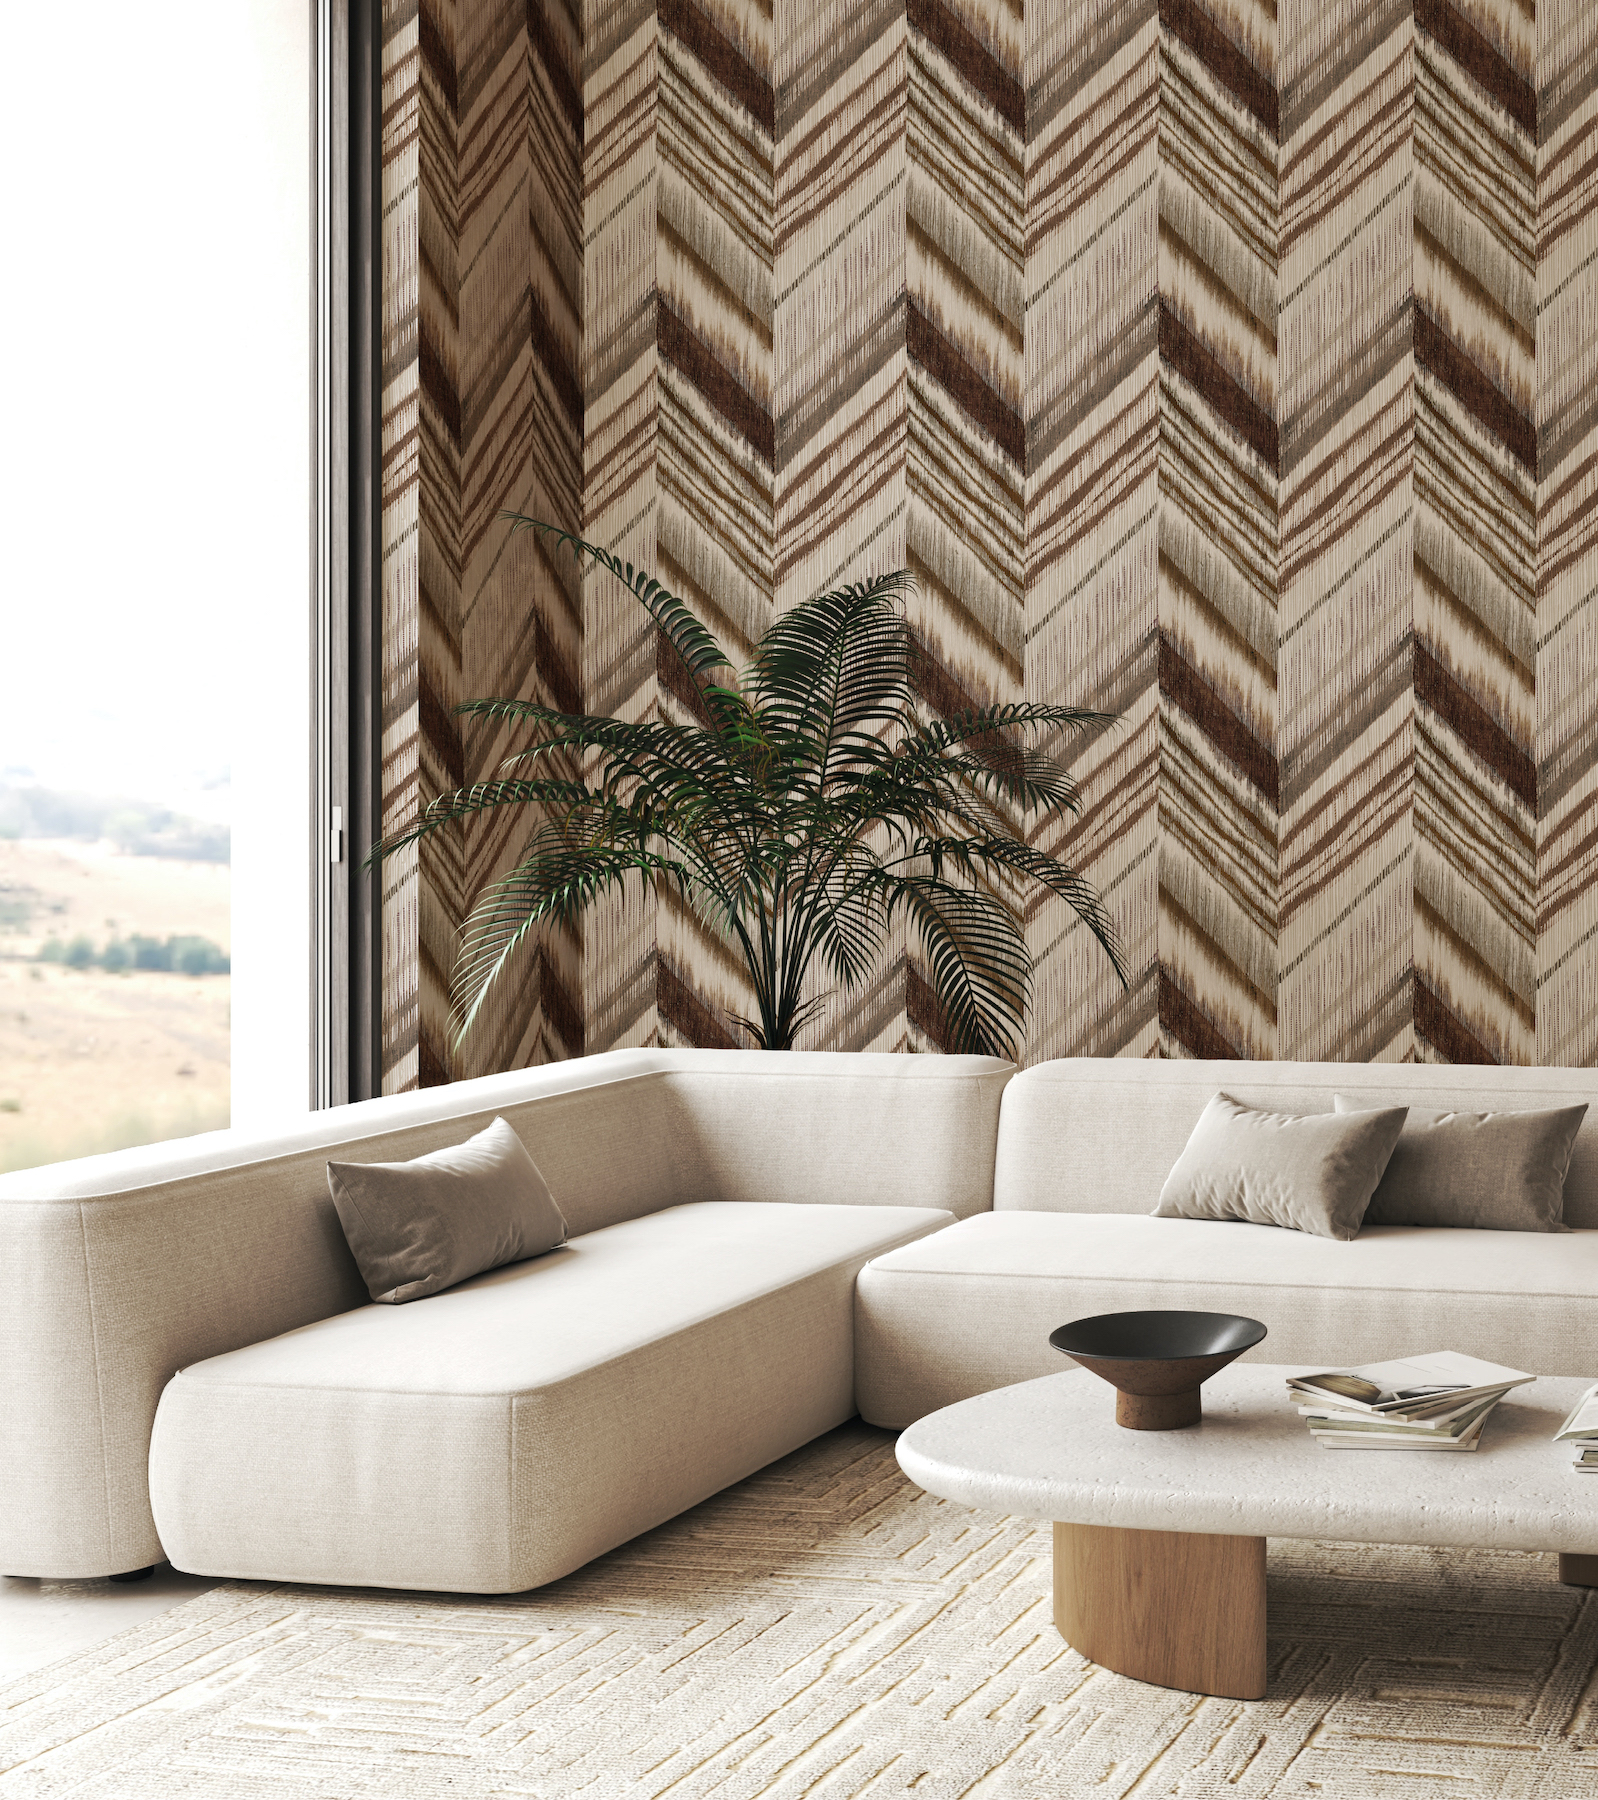 GP & J Baker’s Faraway wallpaper collection includes a digitally printed faux-grasscloth design called Santa Fe